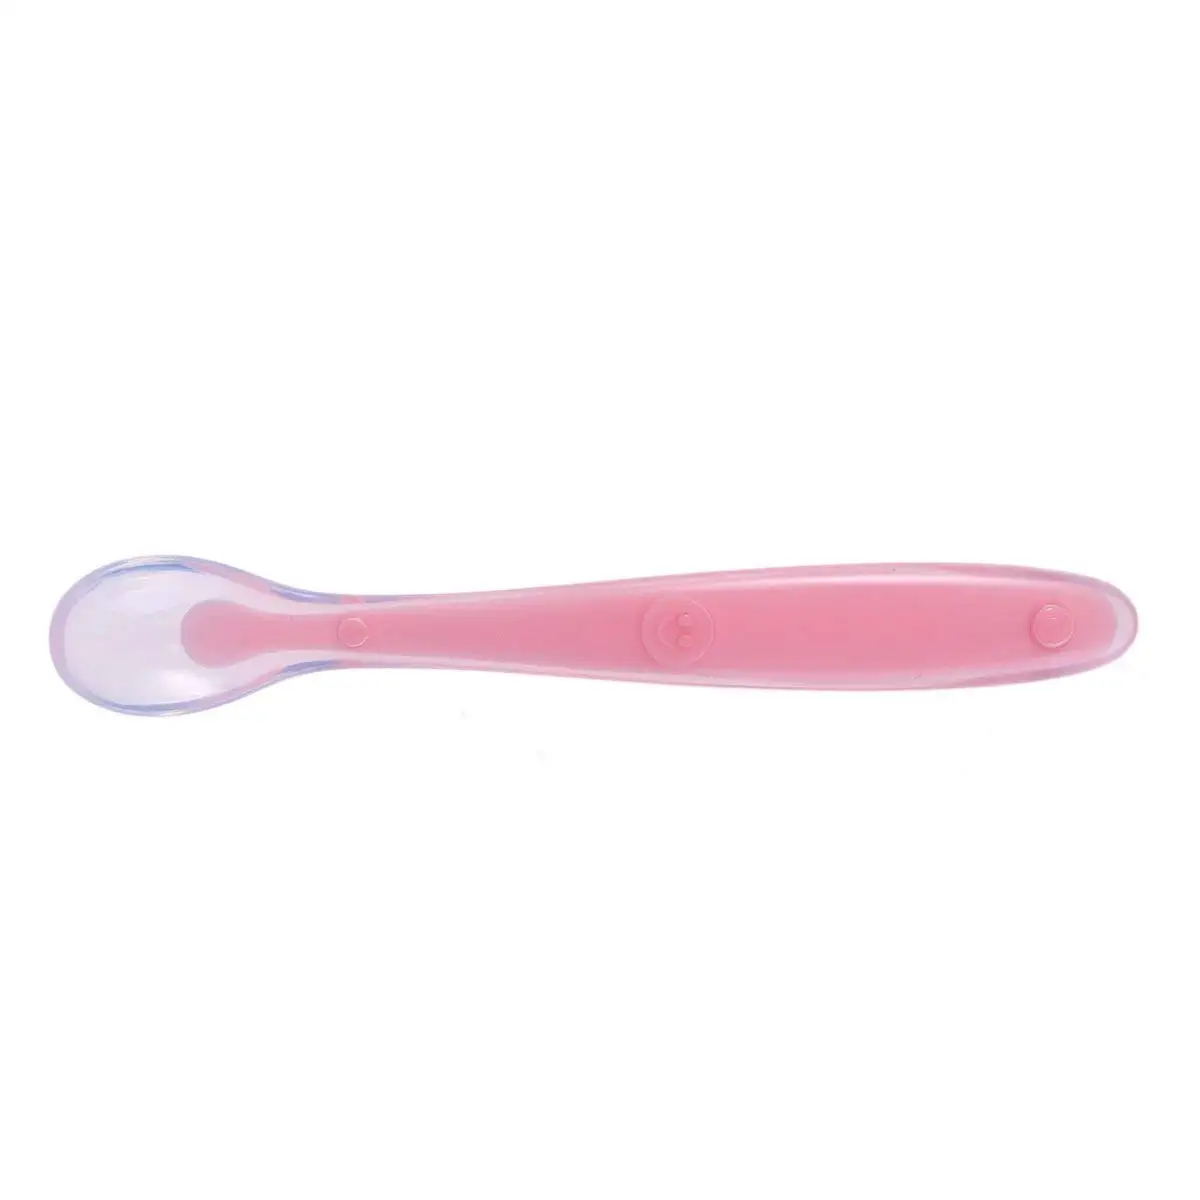 4 rubber tipped baby spoons